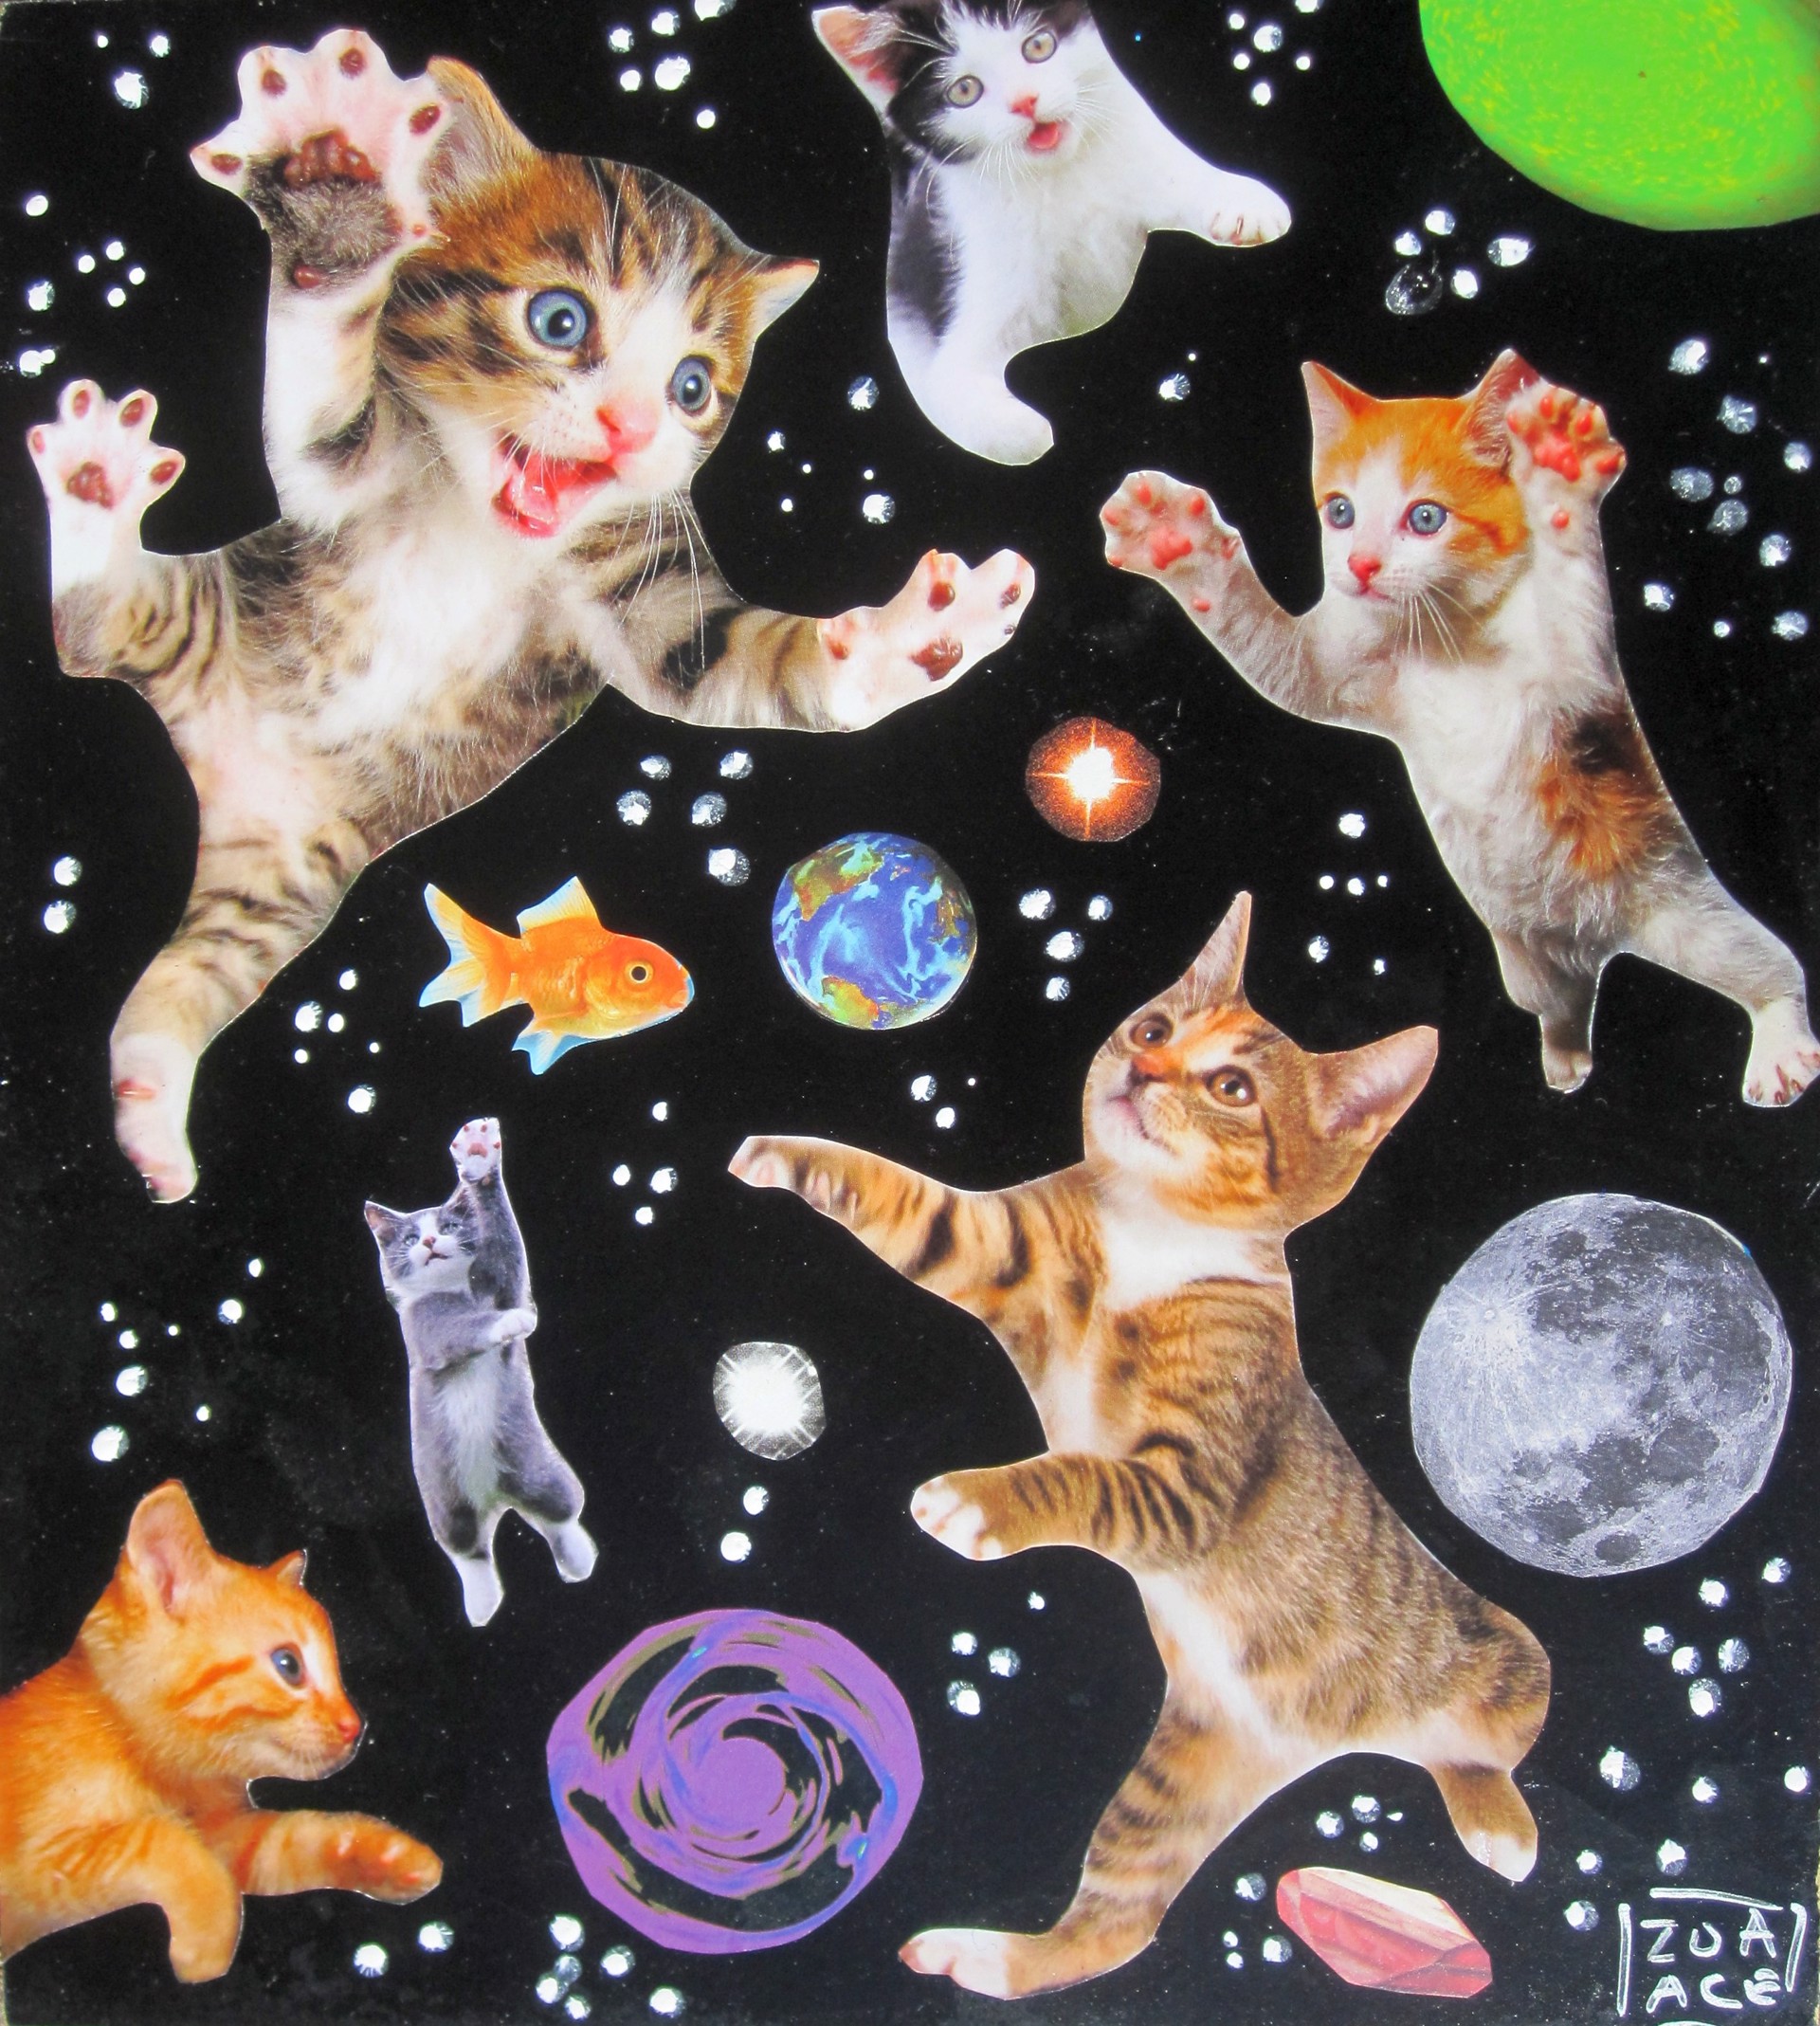 Space Cats by Zoa Ace